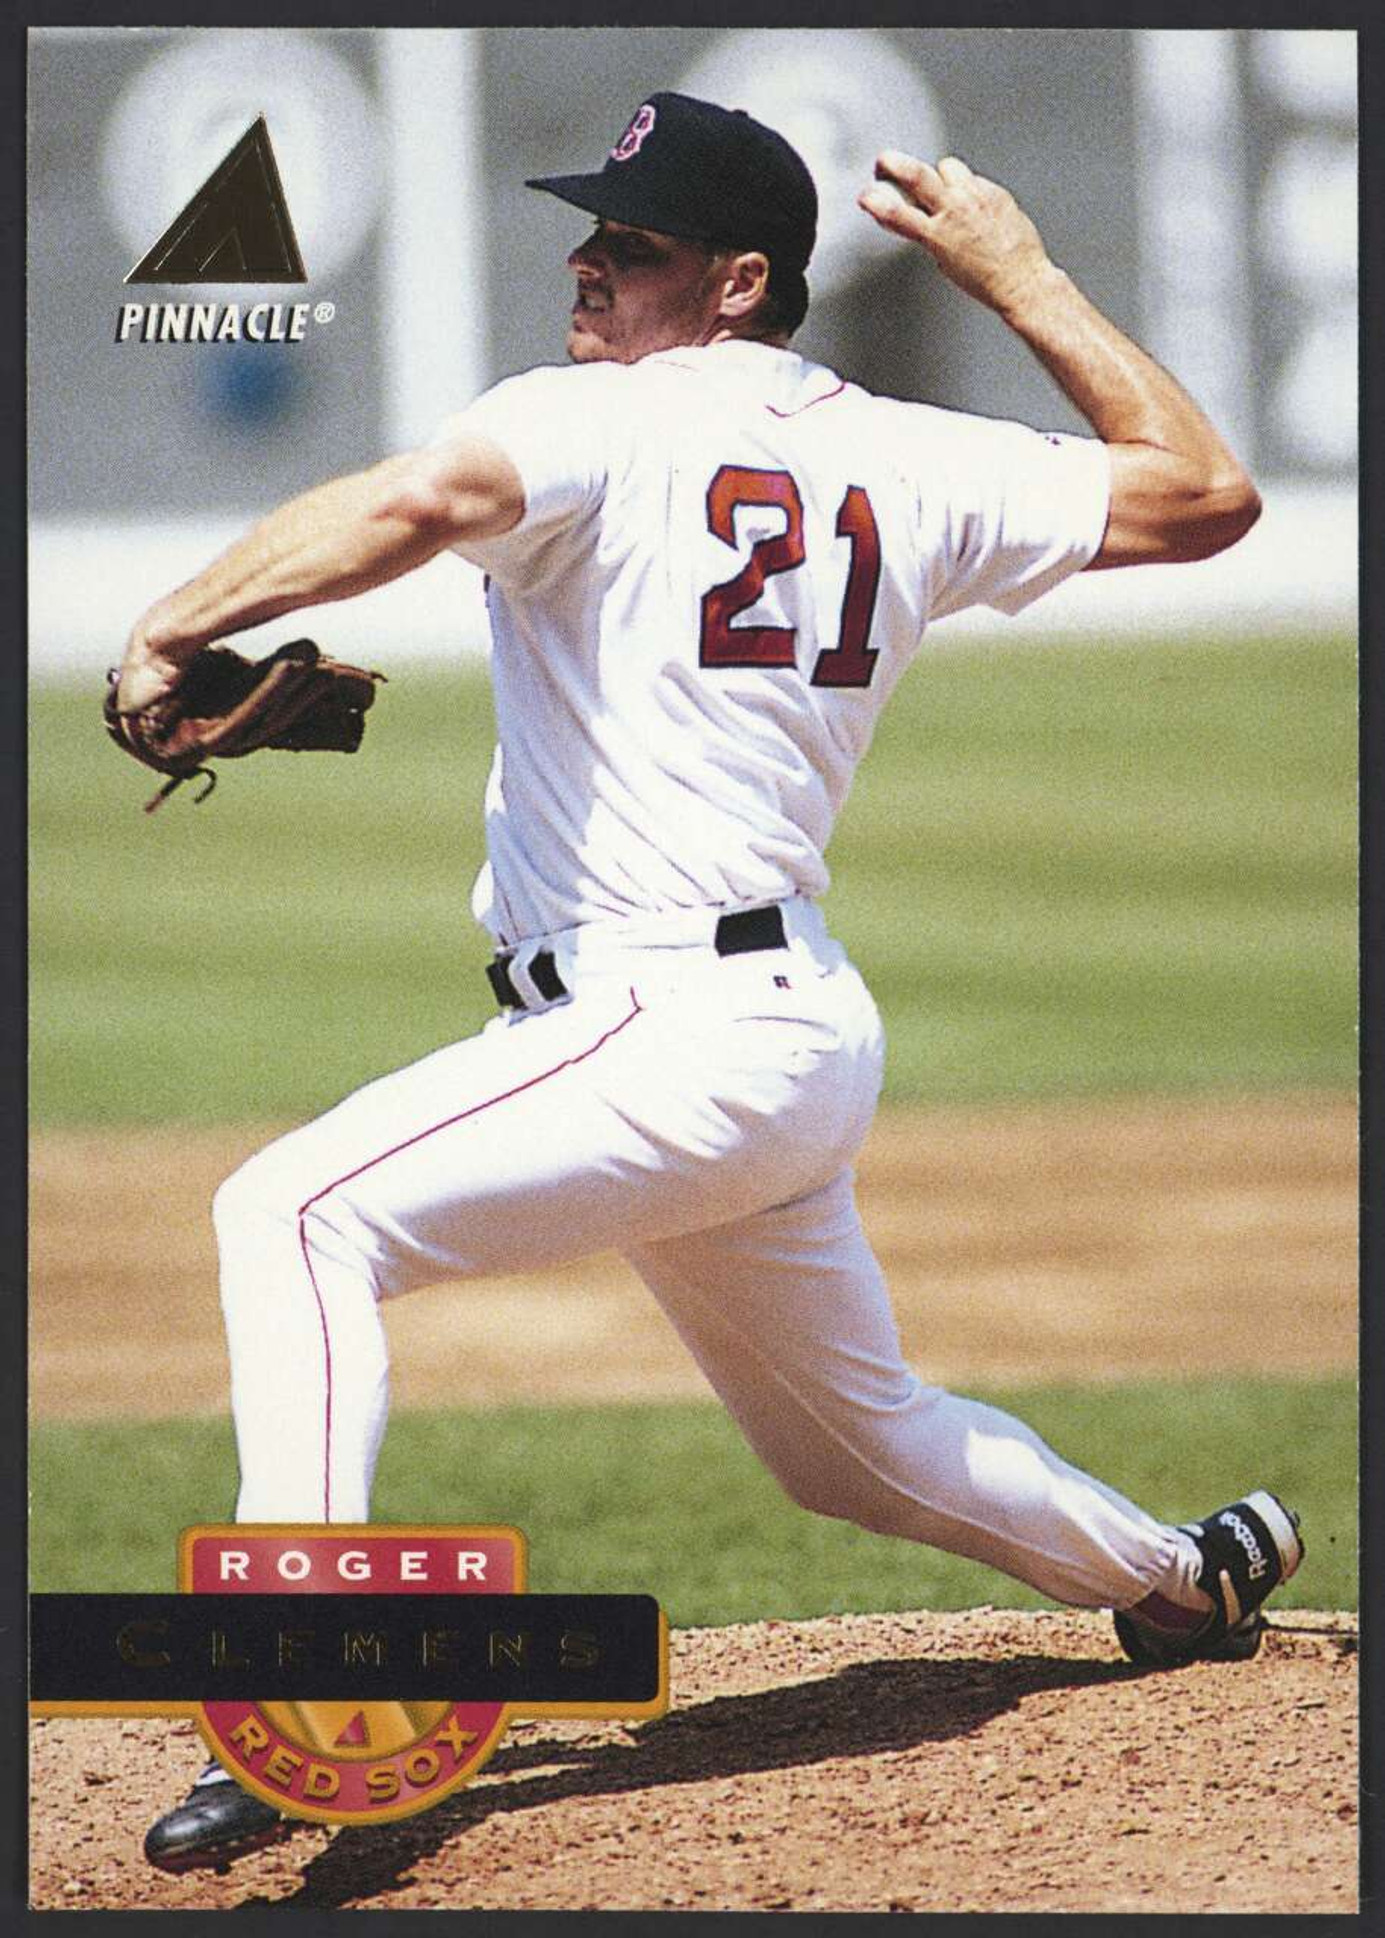 1994 Pinnacle #25 Roger Clemens EX Red Sox